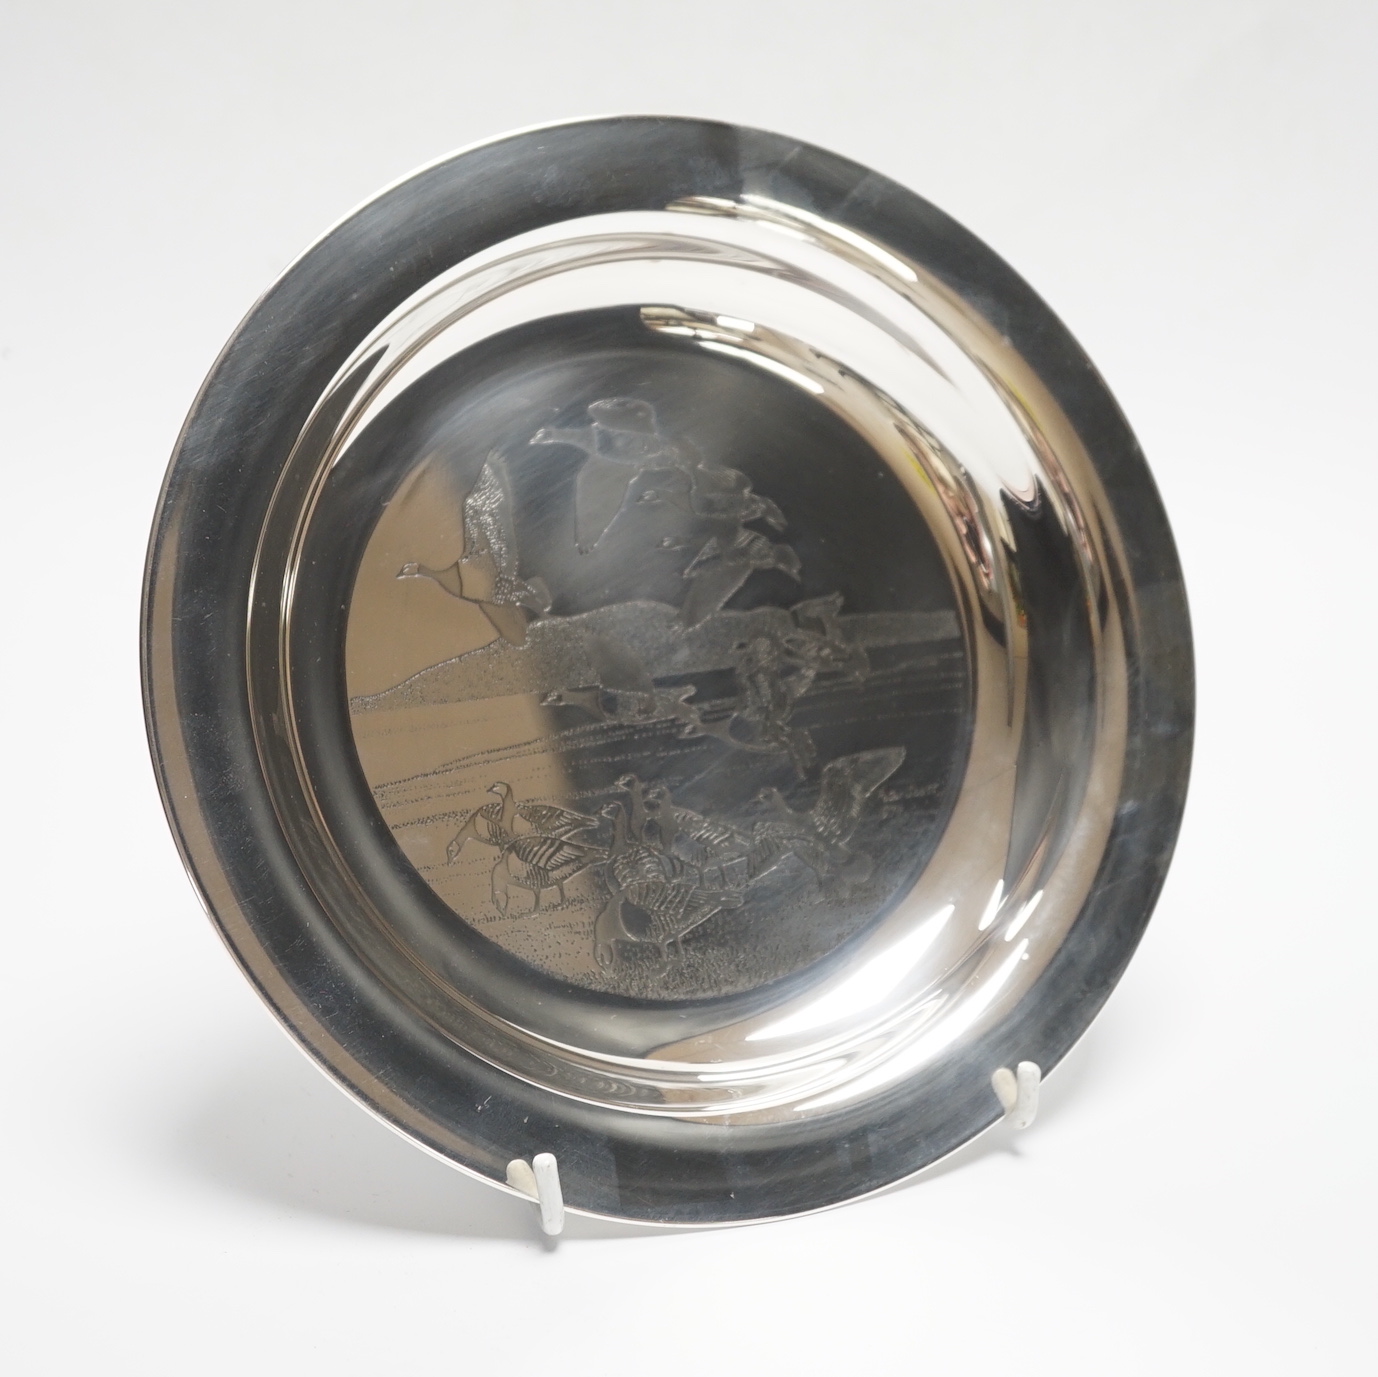 A boxed silver Peter Scott Christmas plate, 1974, depicting etched birds in flight, John Pinches, London 1974. Diameter 20.5cm, 5.9oz.